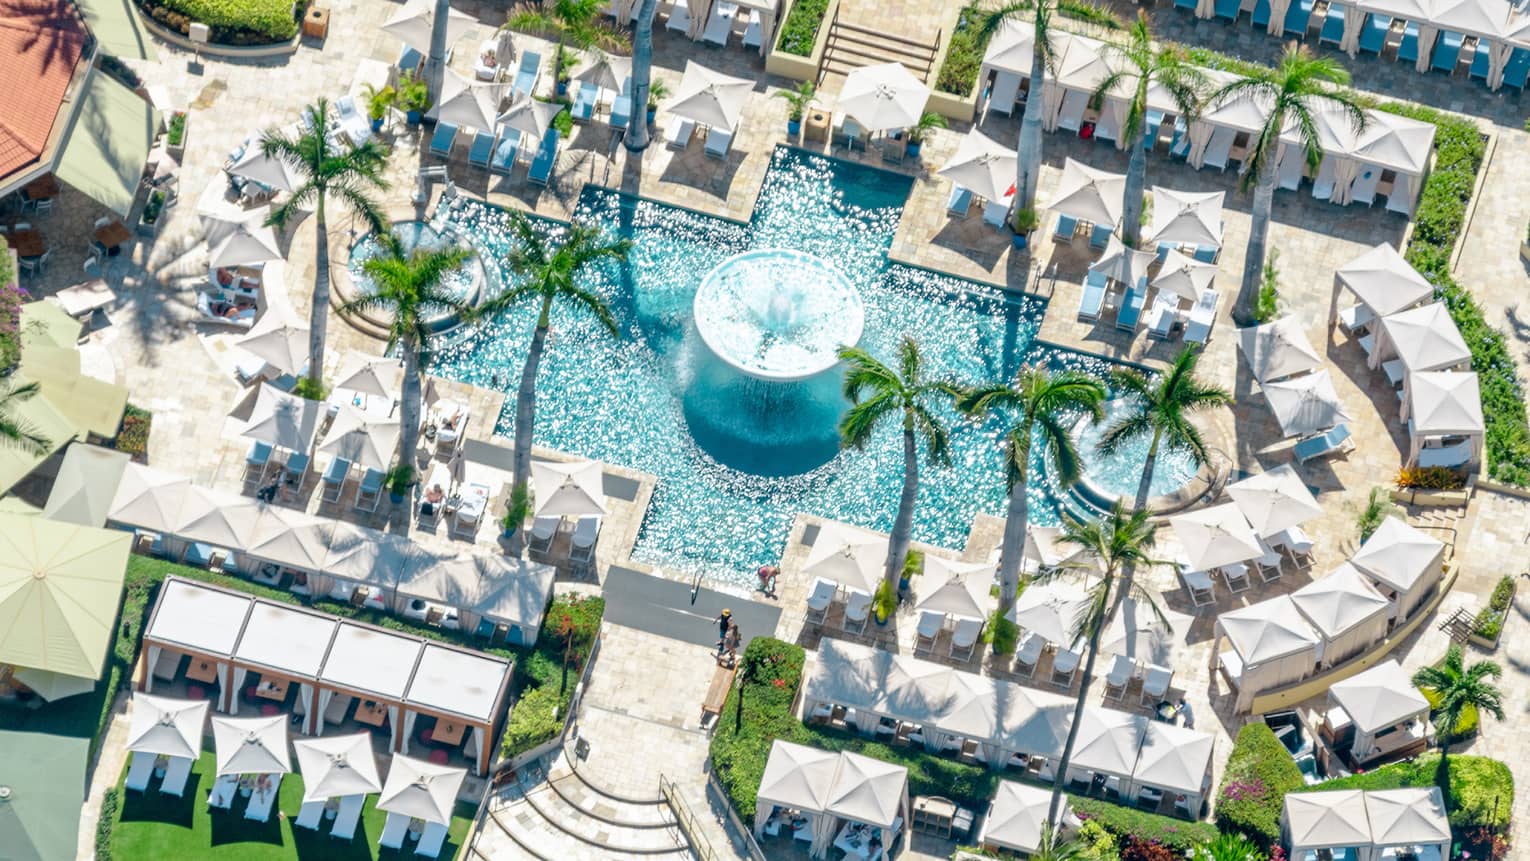 Aerial view of resort pool with fountain, umbrellas and cabanas